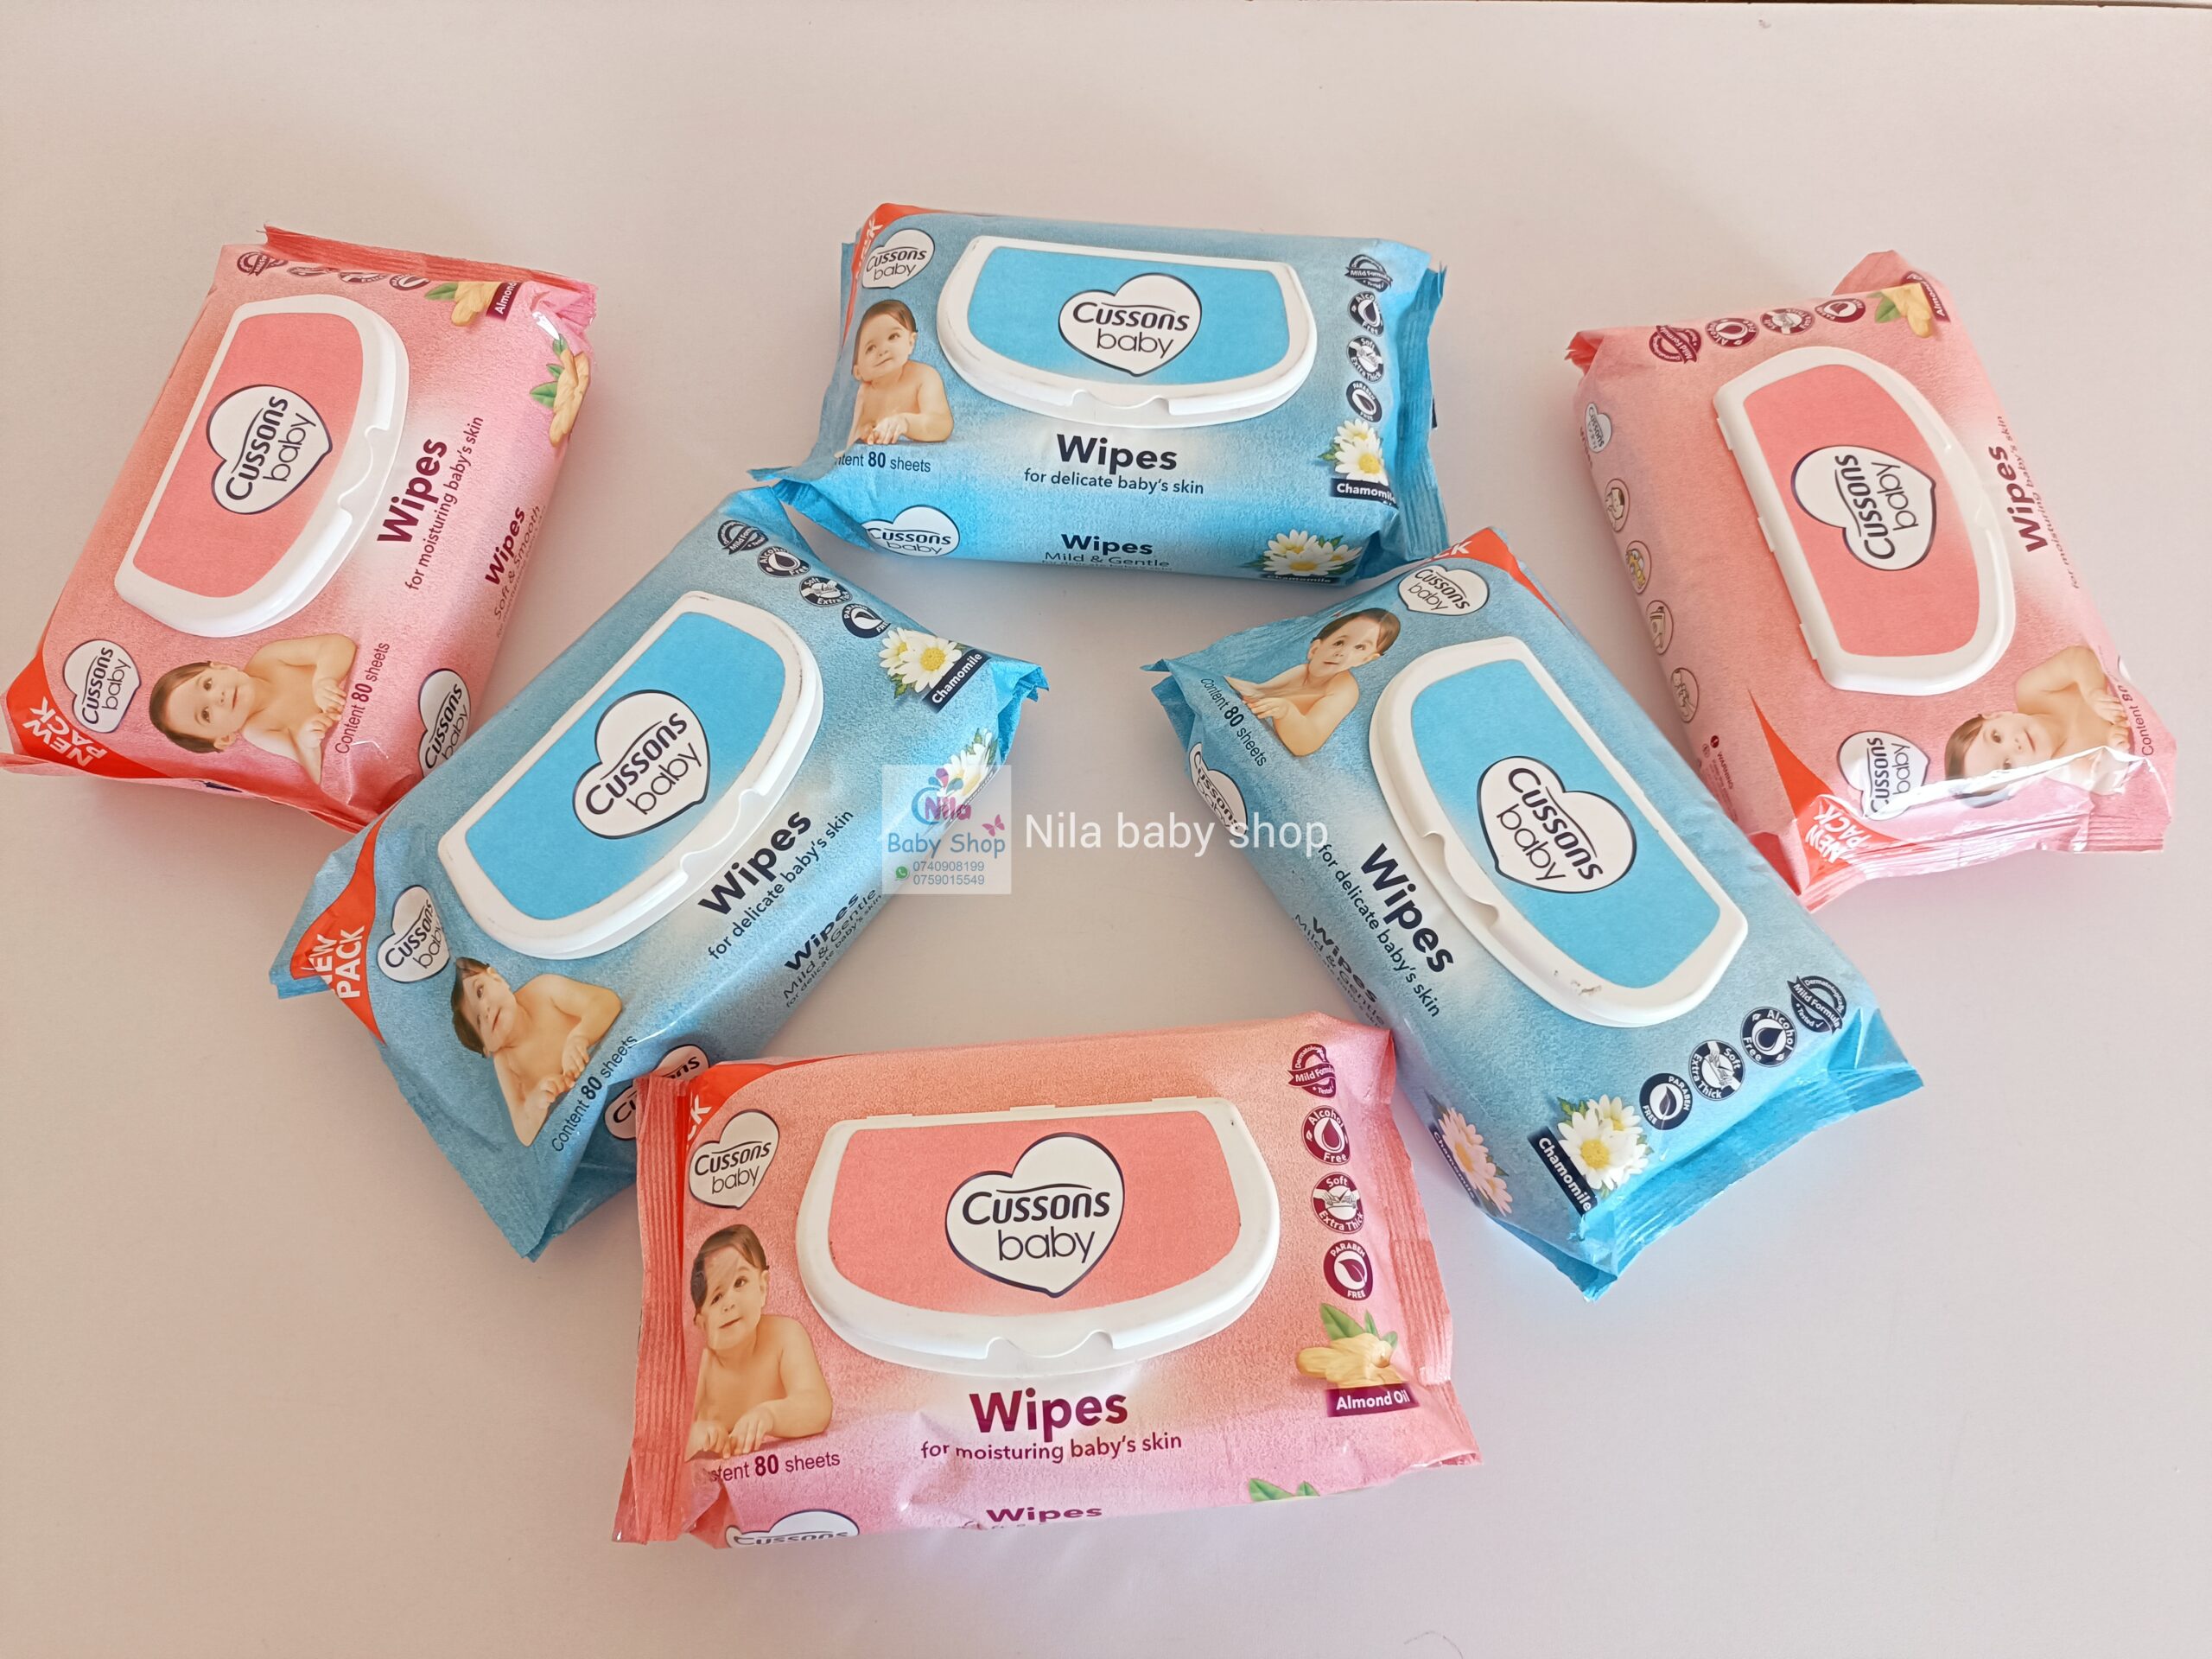 Cussons Baby Wipes (80 sheets) – Nila Baby Shop